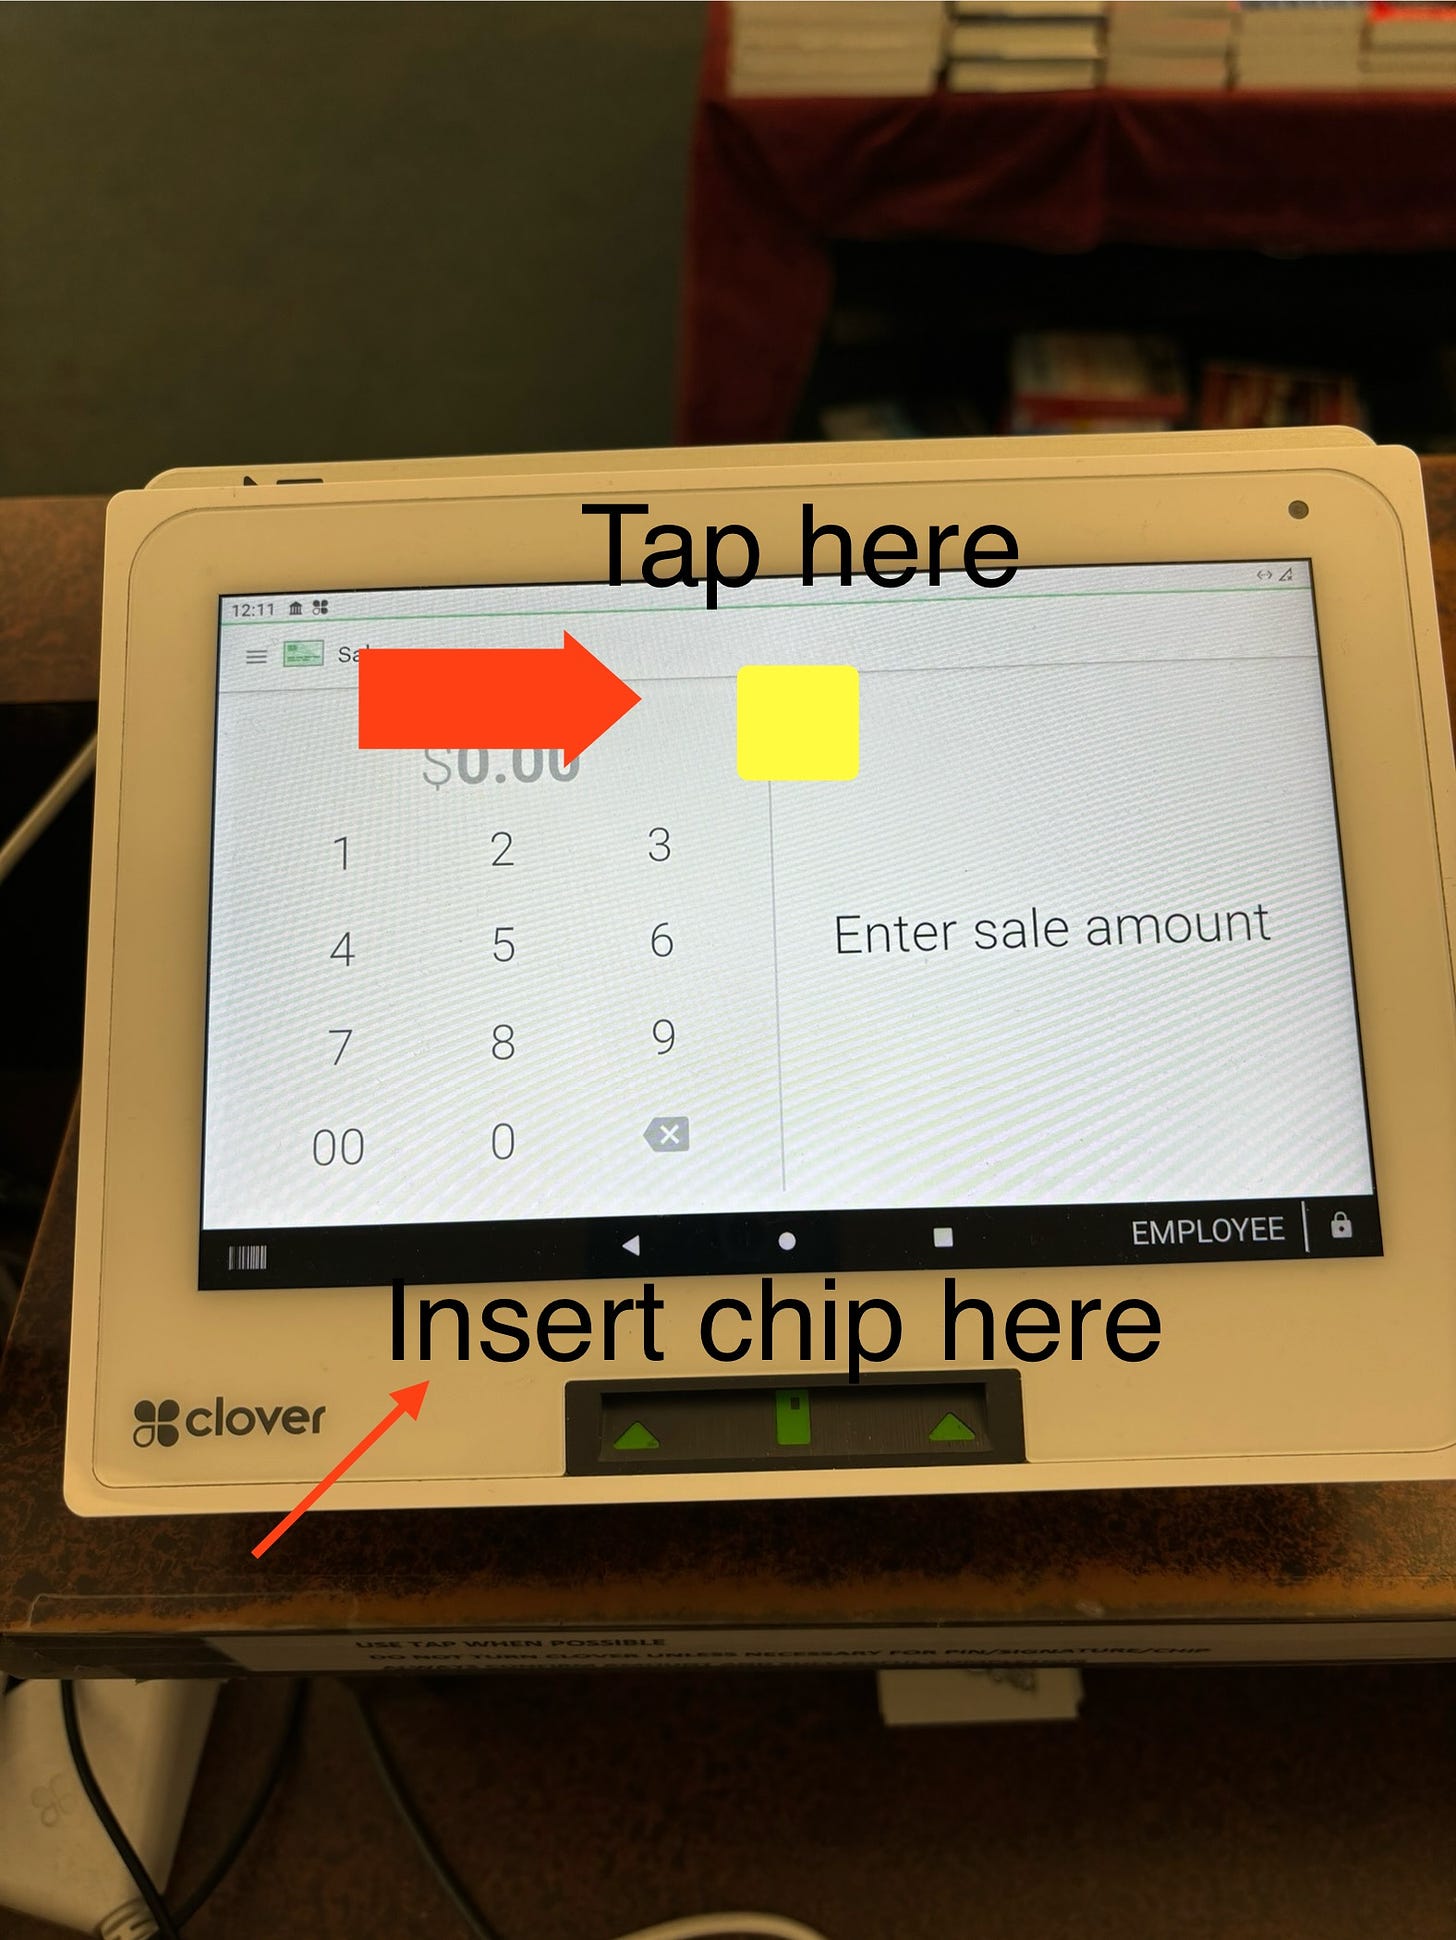 Clover card processing machine annotated with where to tap and where to insert the chip.